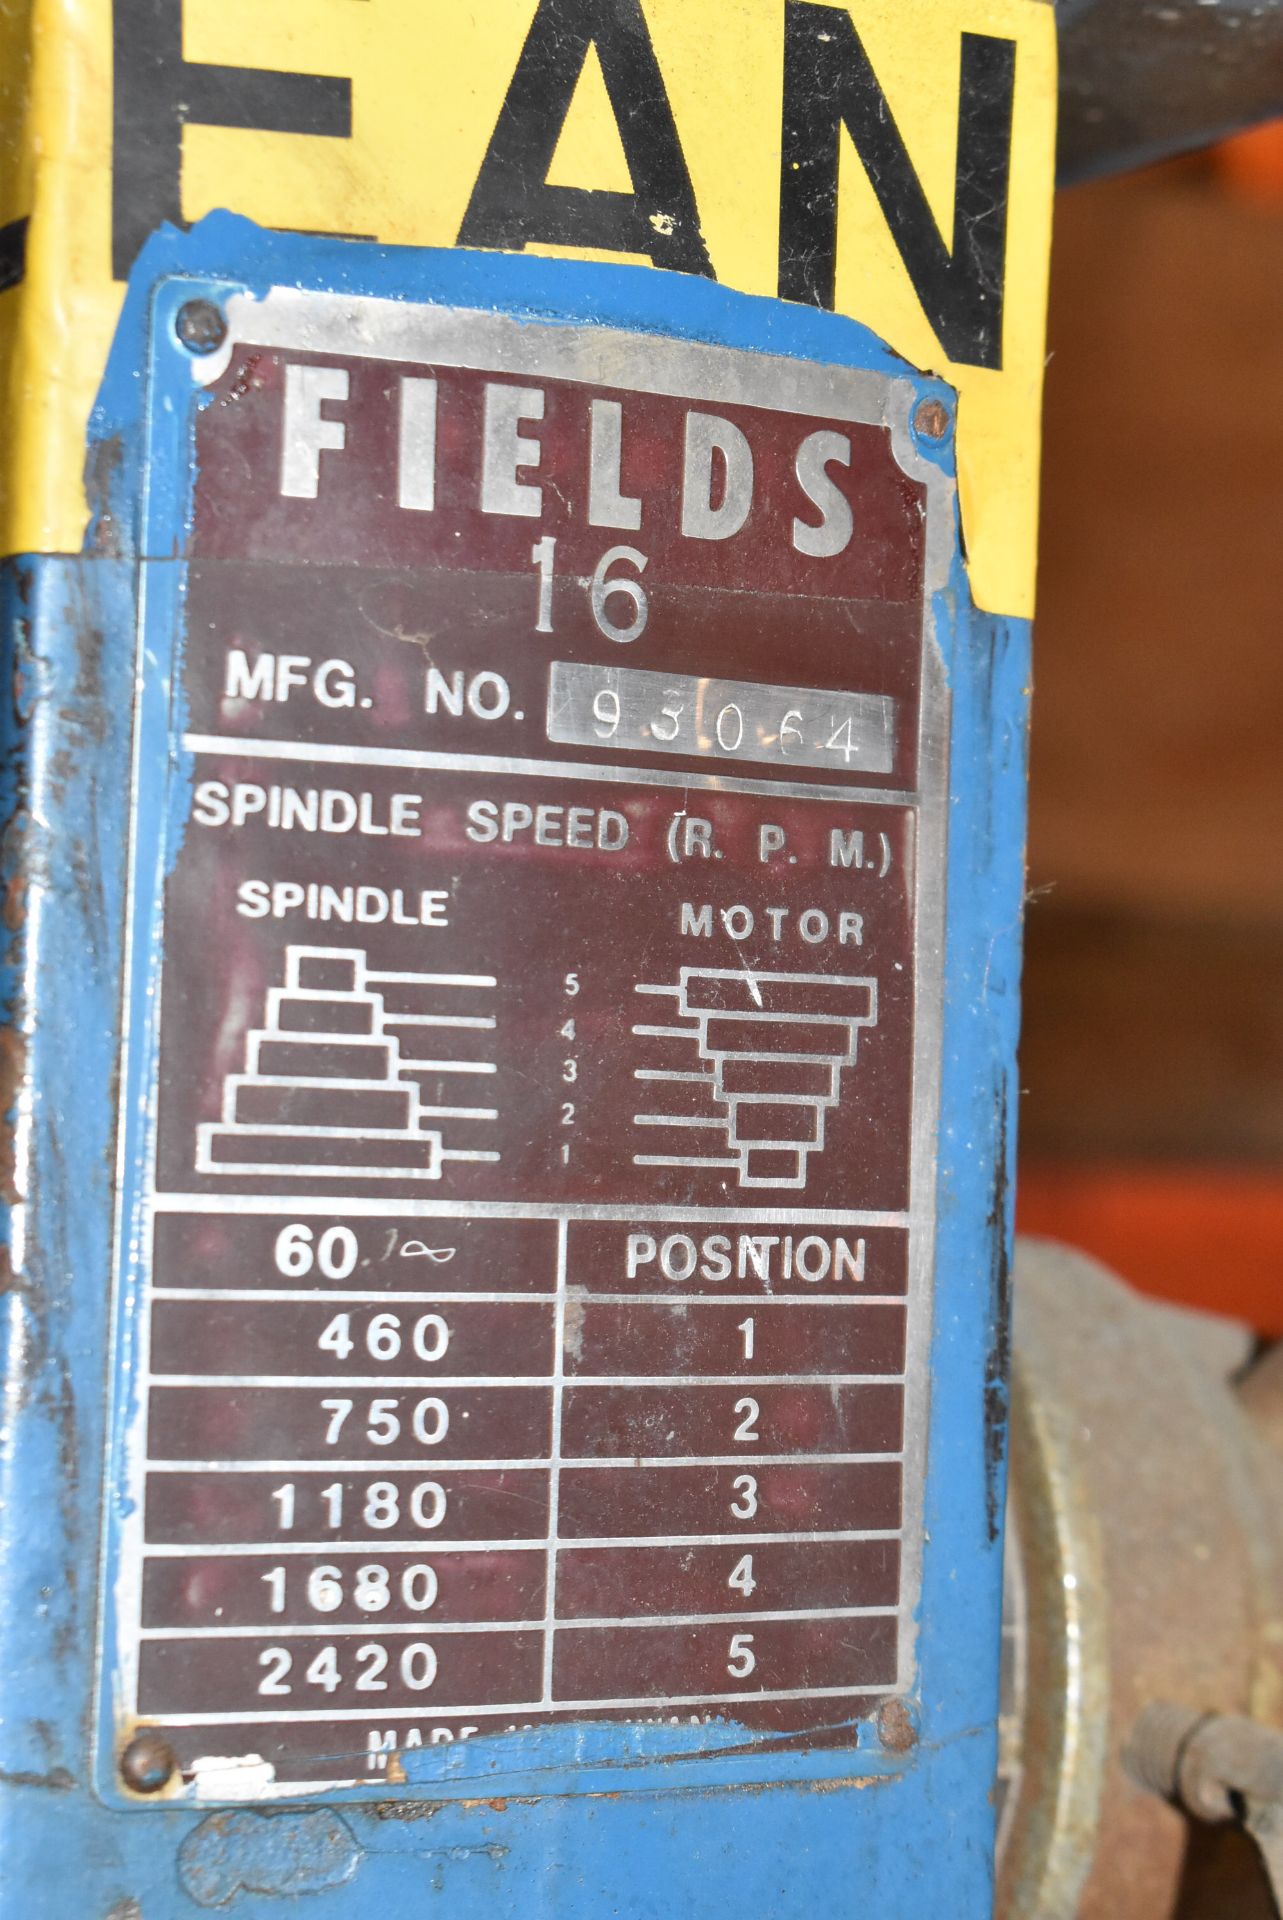 FIELDS 16 DRILL PRESS WITH SPEEDS TO 2,420 RPM, S/N 93064 (CMD-322-23S) - Image 3 of 4